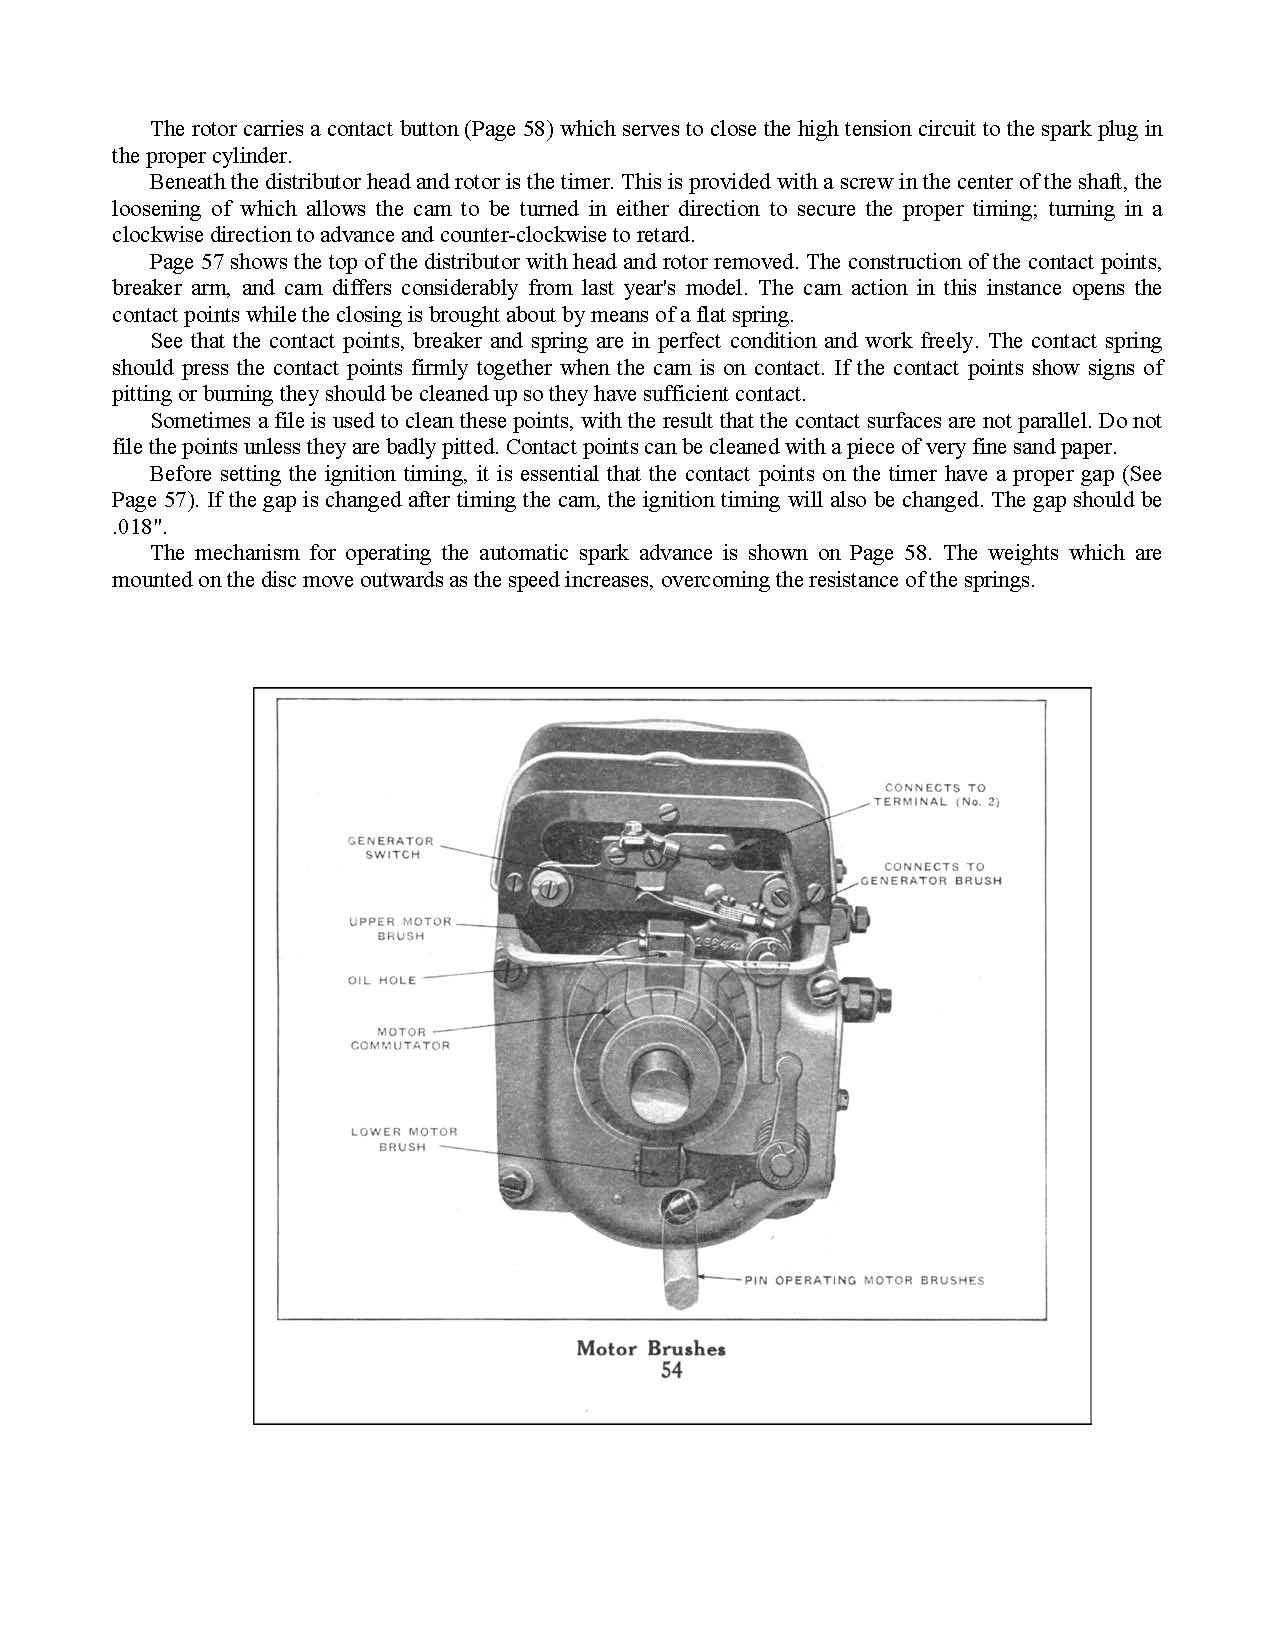 1916 Hudson Super-Six Reference Book Page 34